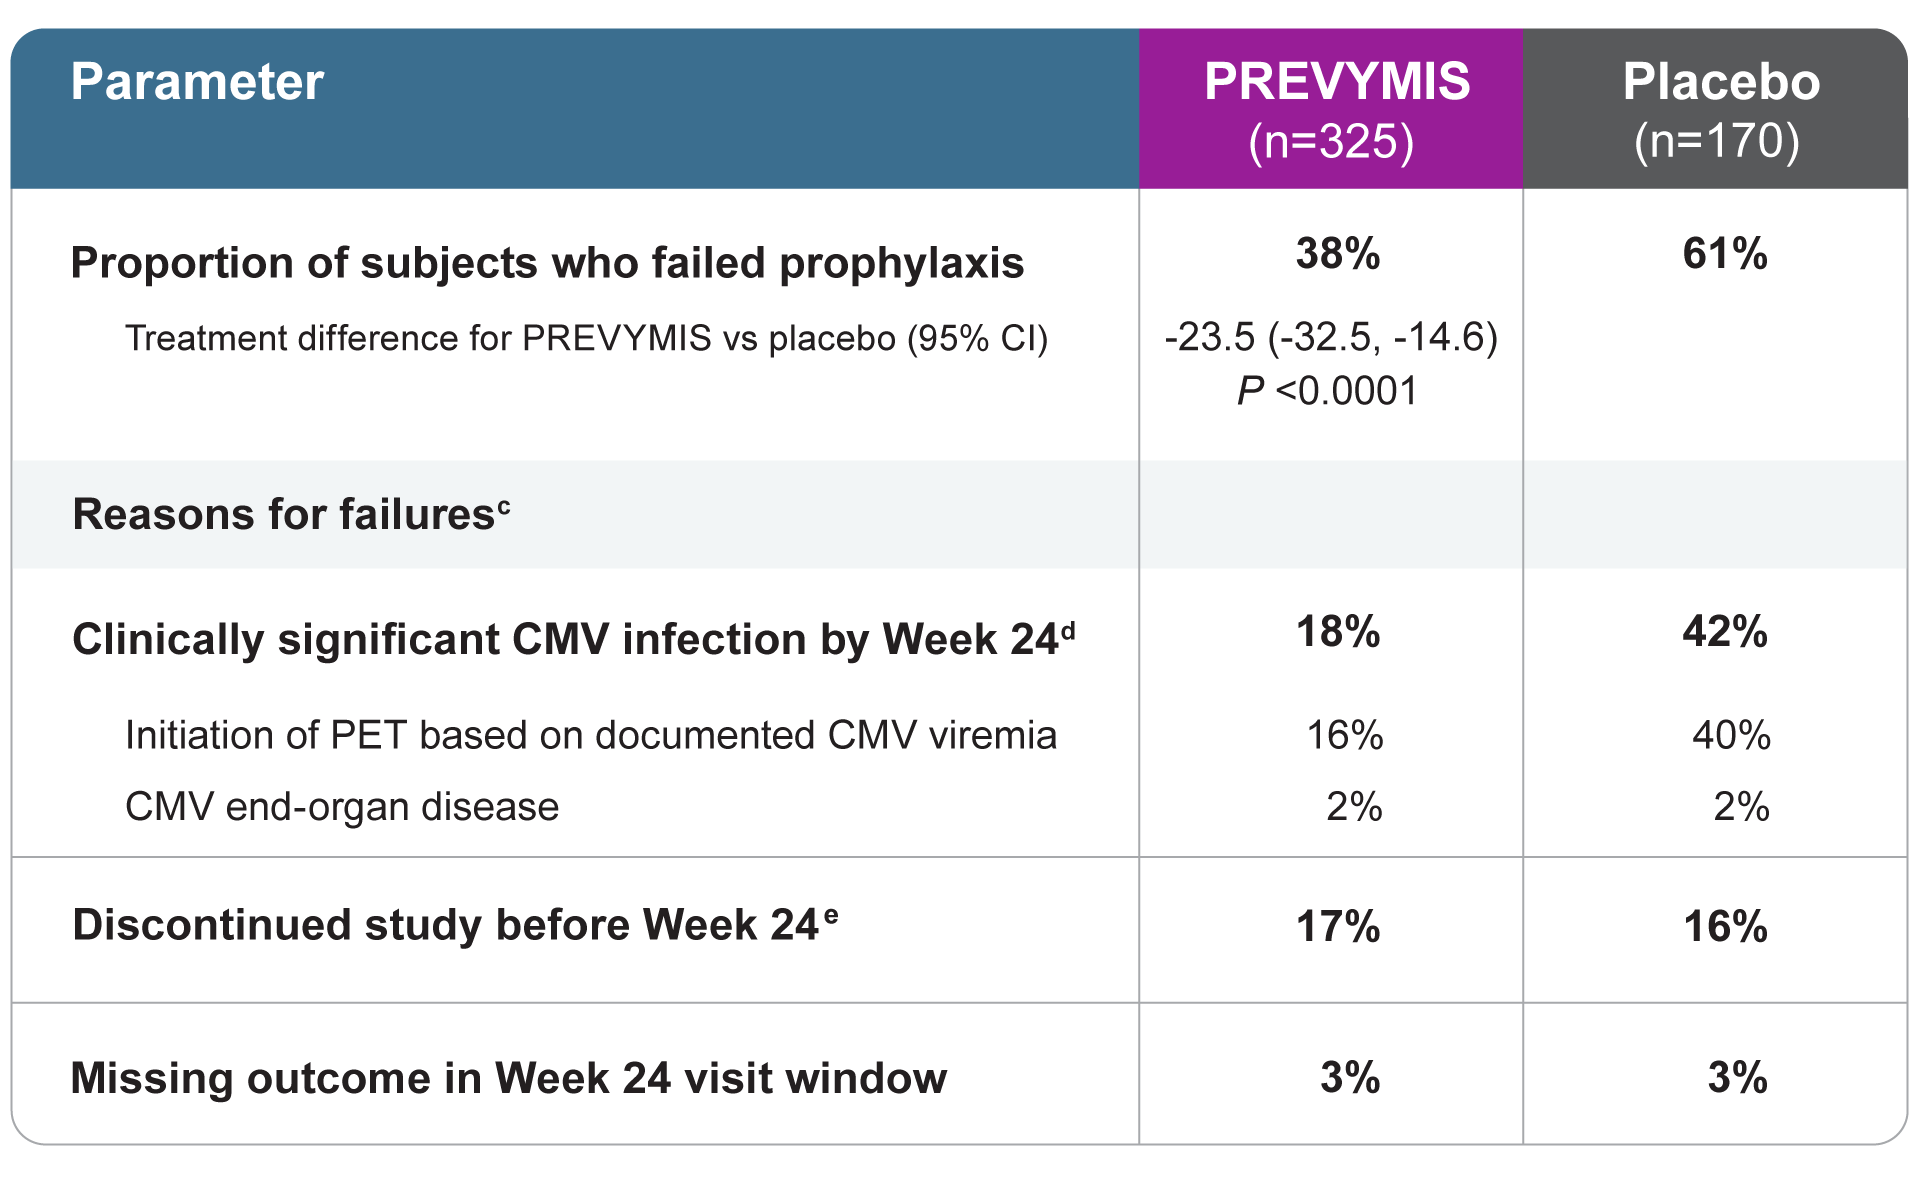 PREVYMIS® (letermovir) Demonstrated Clinically Significant Efficacy Through Week 24